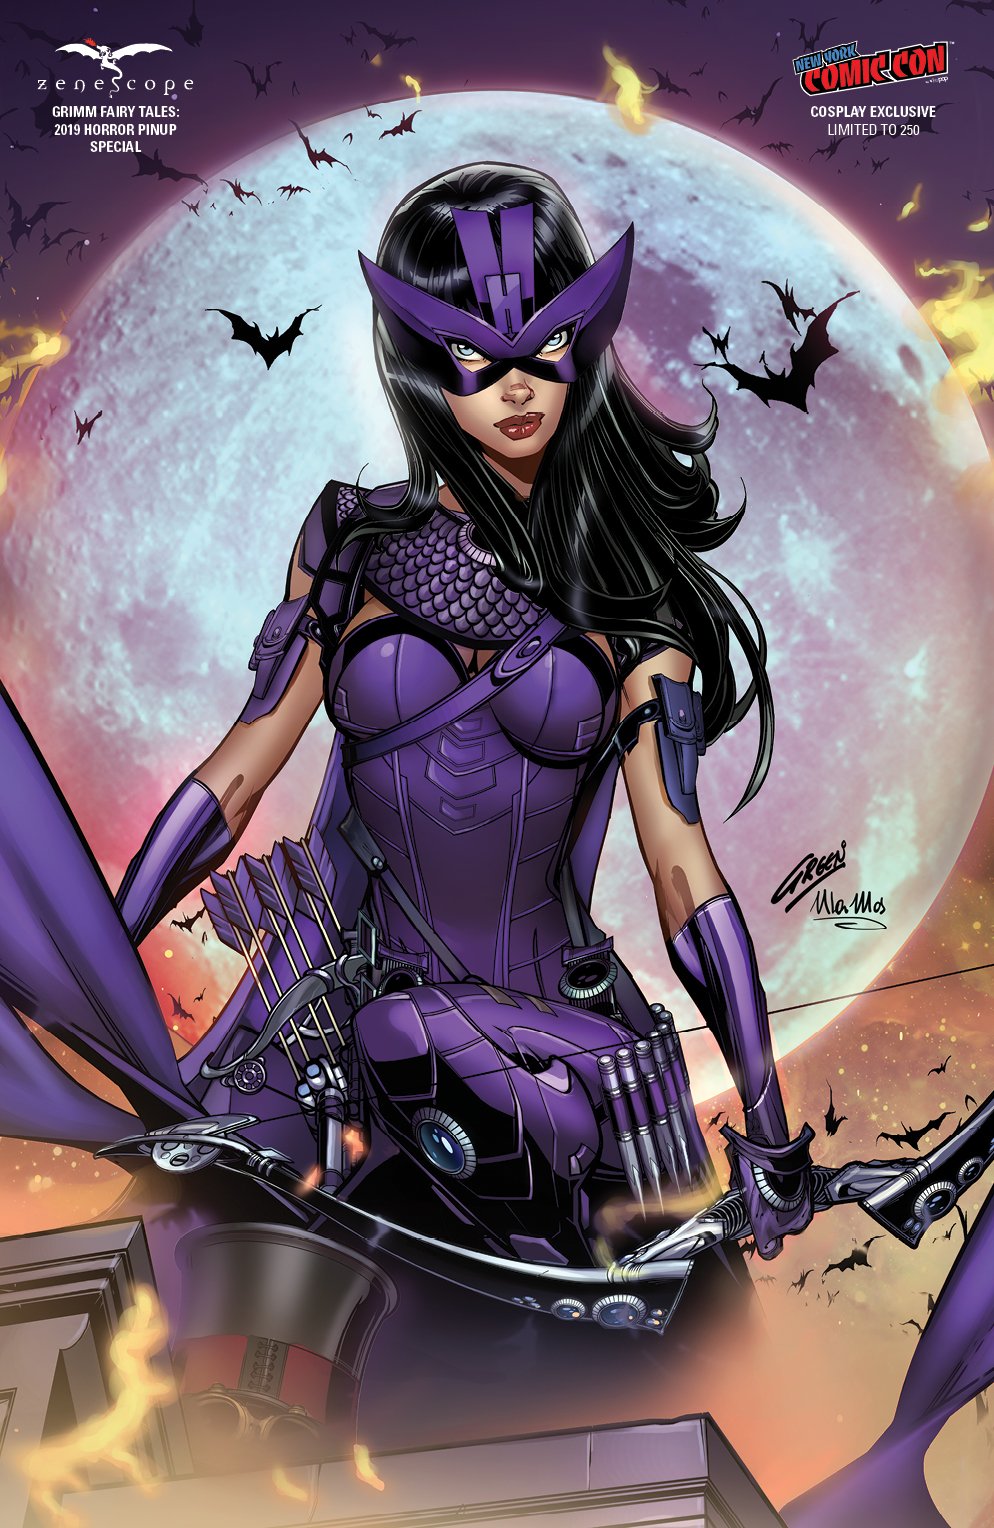 Image of Grimm Fairy Tales 2019 Horror Pinup Special - Cover E - LE 250